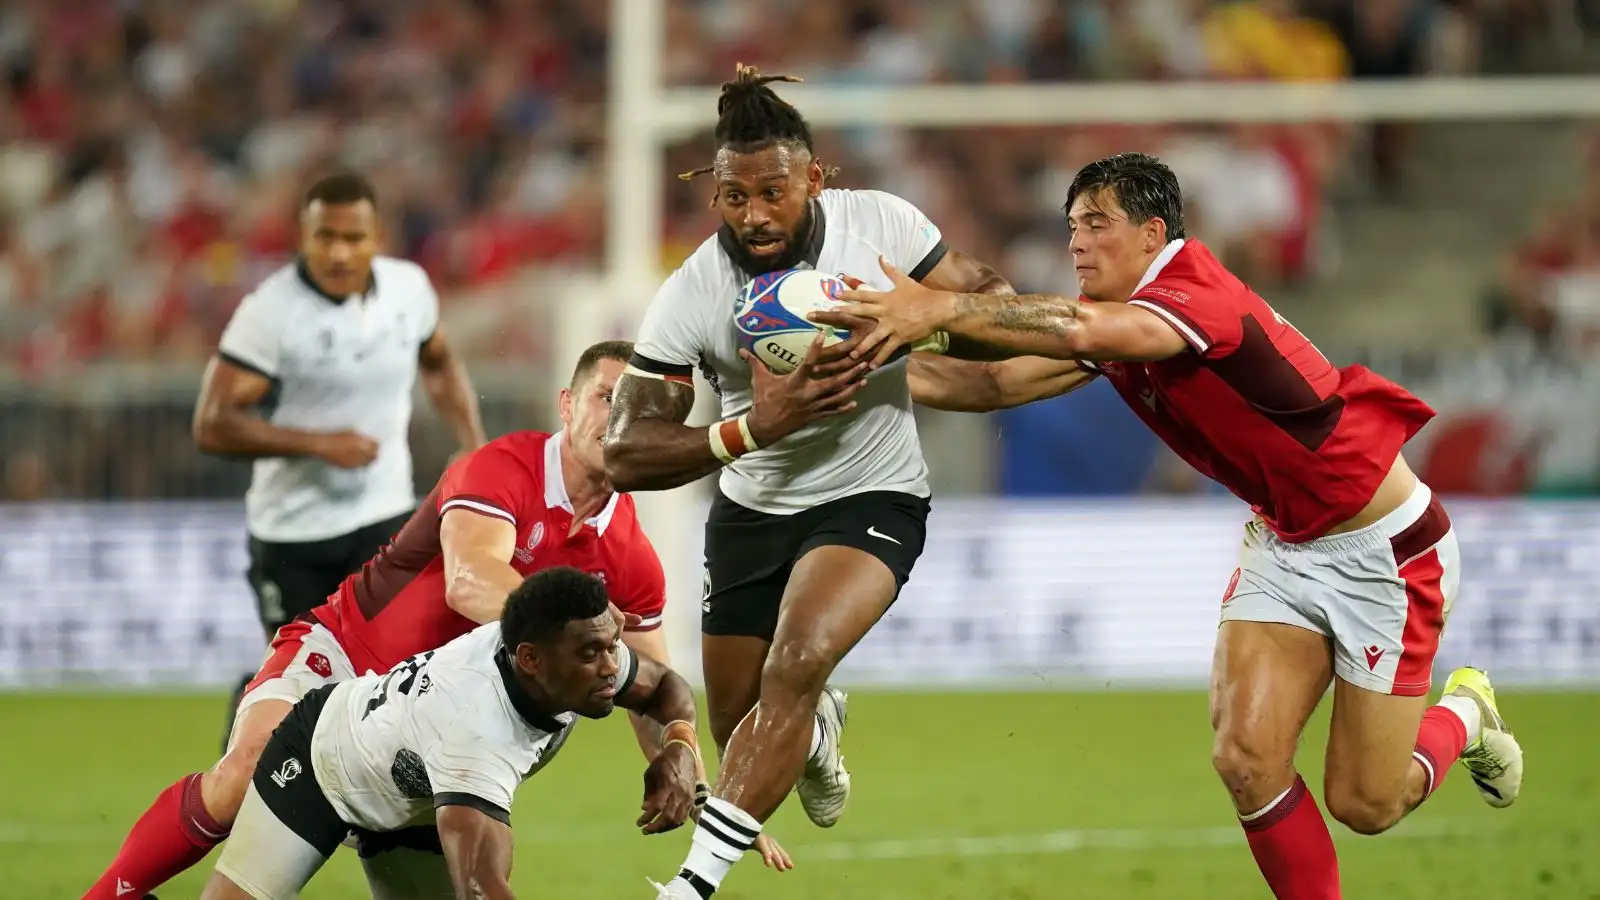 Fiji's Waisea Nayacalevu is tackled by Wales' Louis Rees-Zammit (right) during the 2023 Rugby World Cup Pool C match at the Stade de Bordeaux, France.